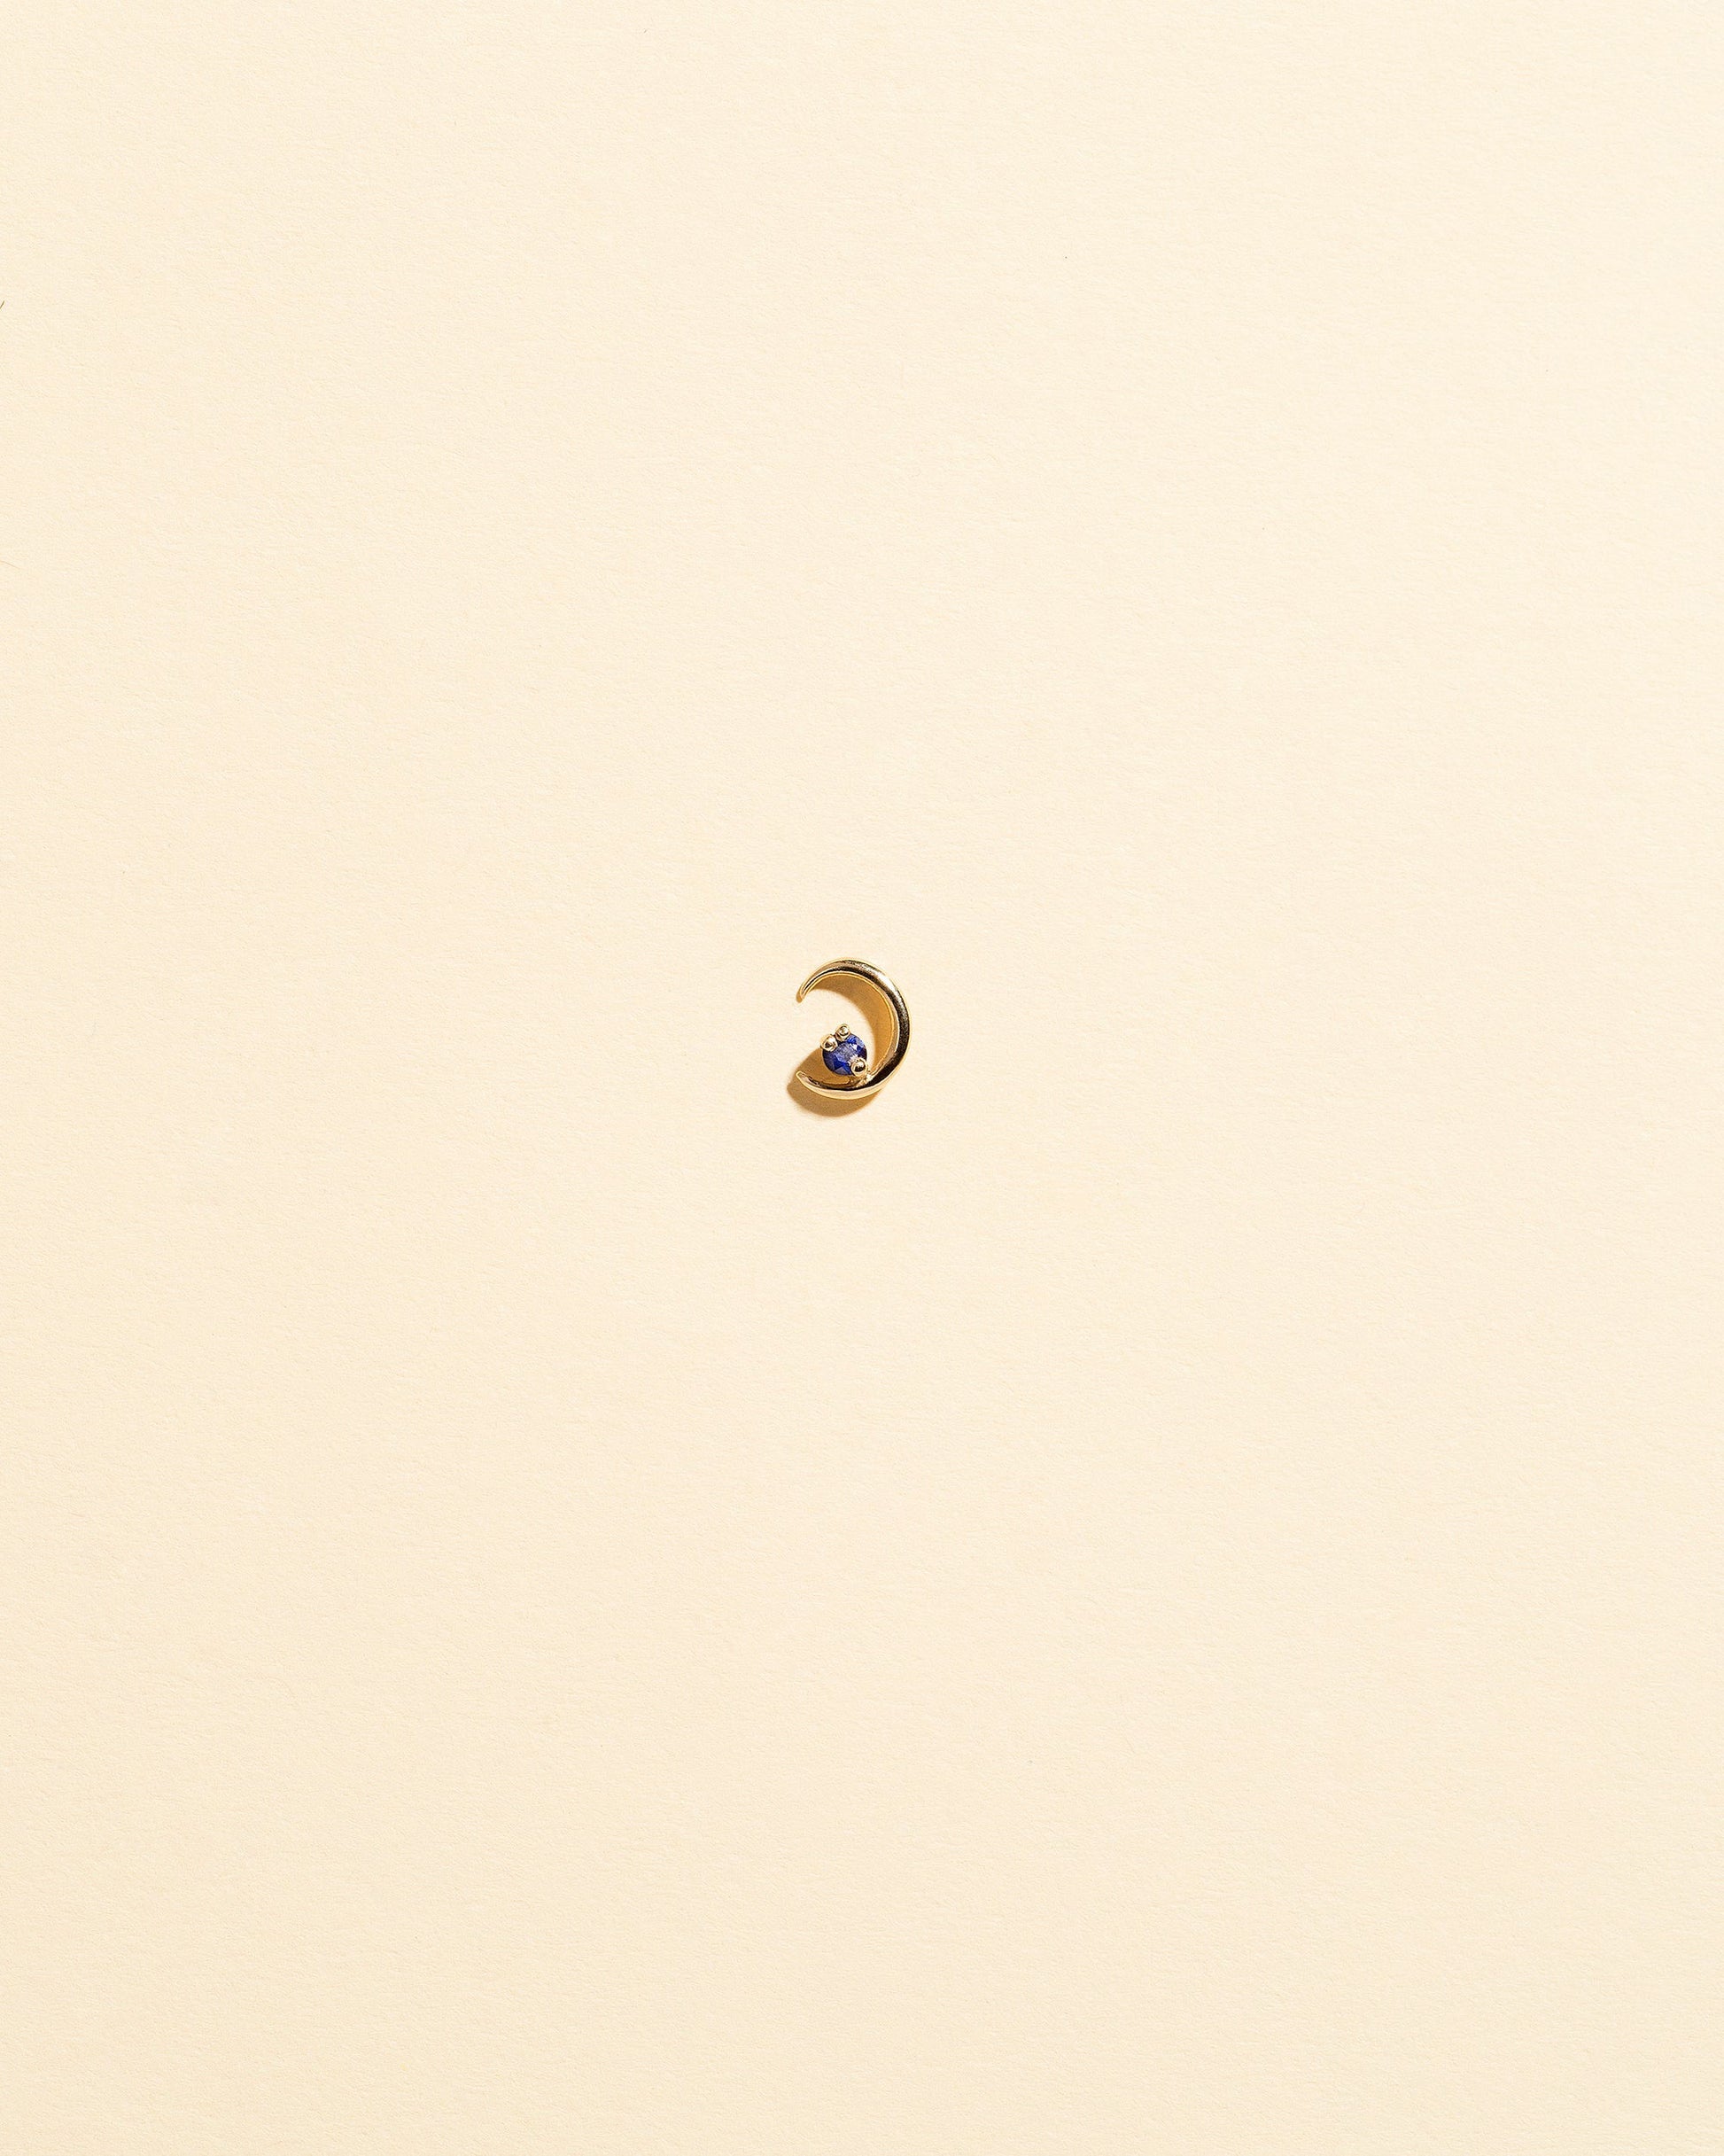 Left Sapphire Moon Ray Stud Earring Single on light color background.